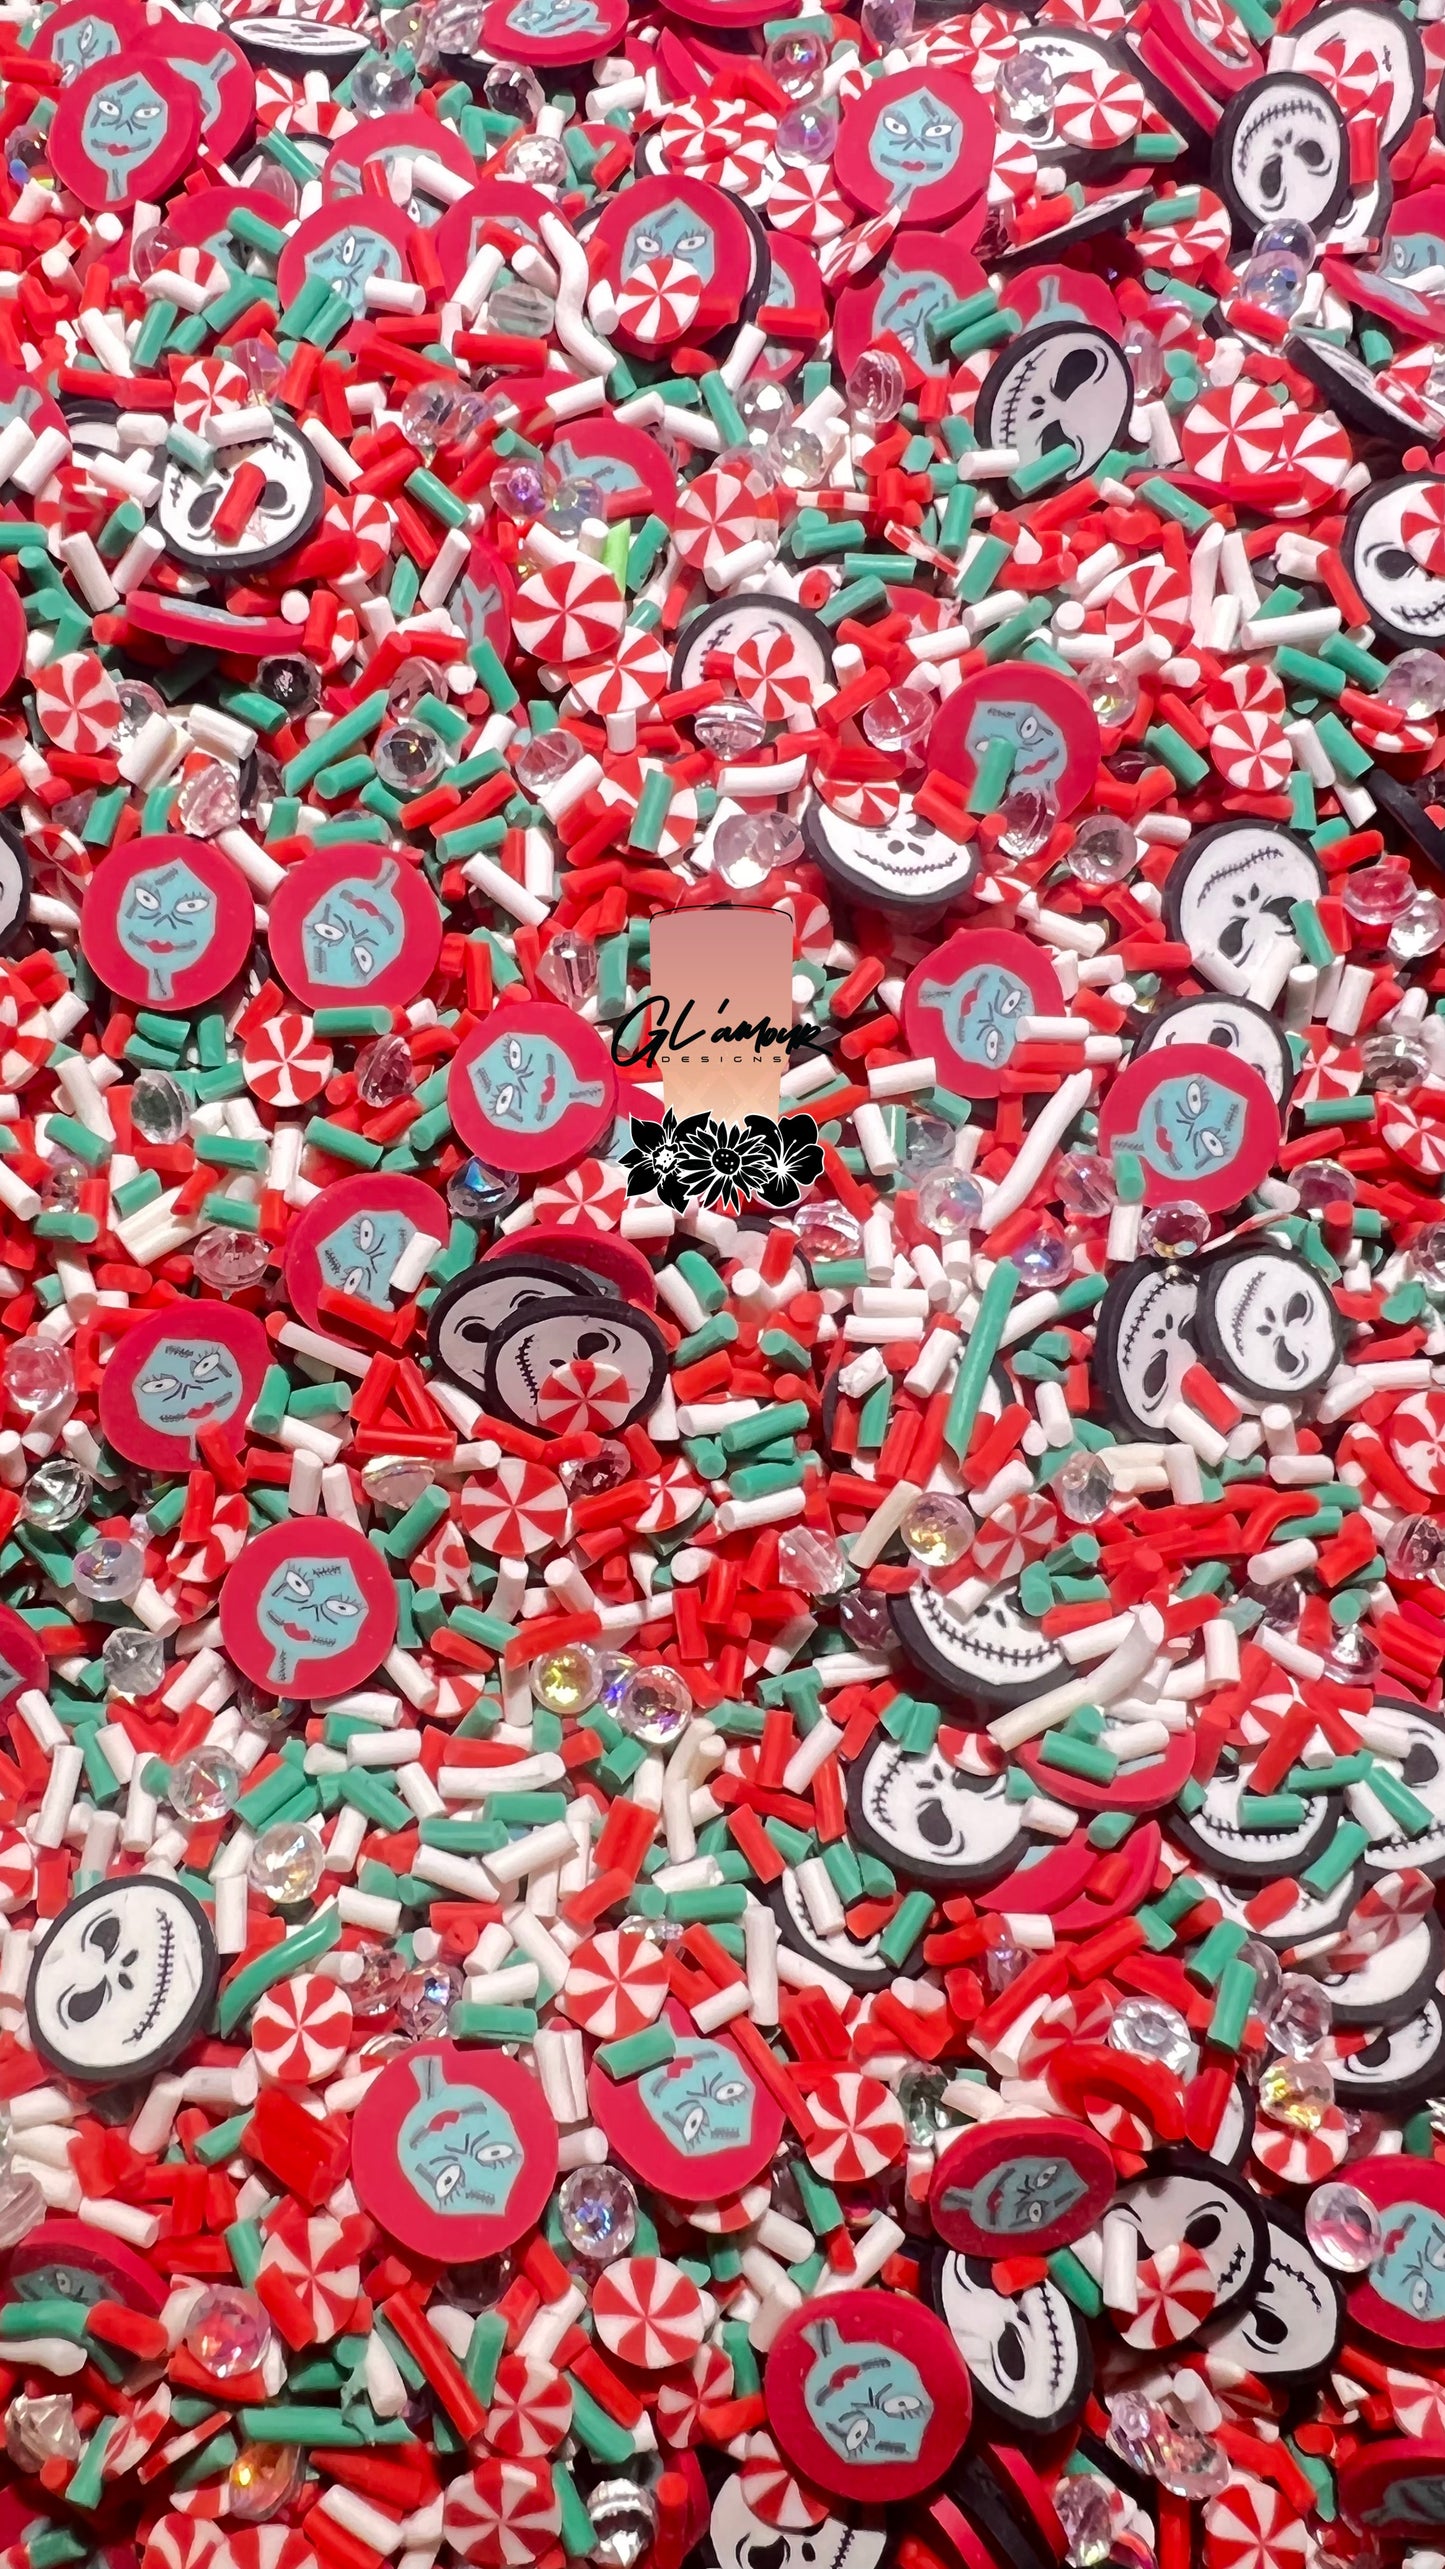 Jack & Sally's Jolly Mix- sizes 5mm and 10mm